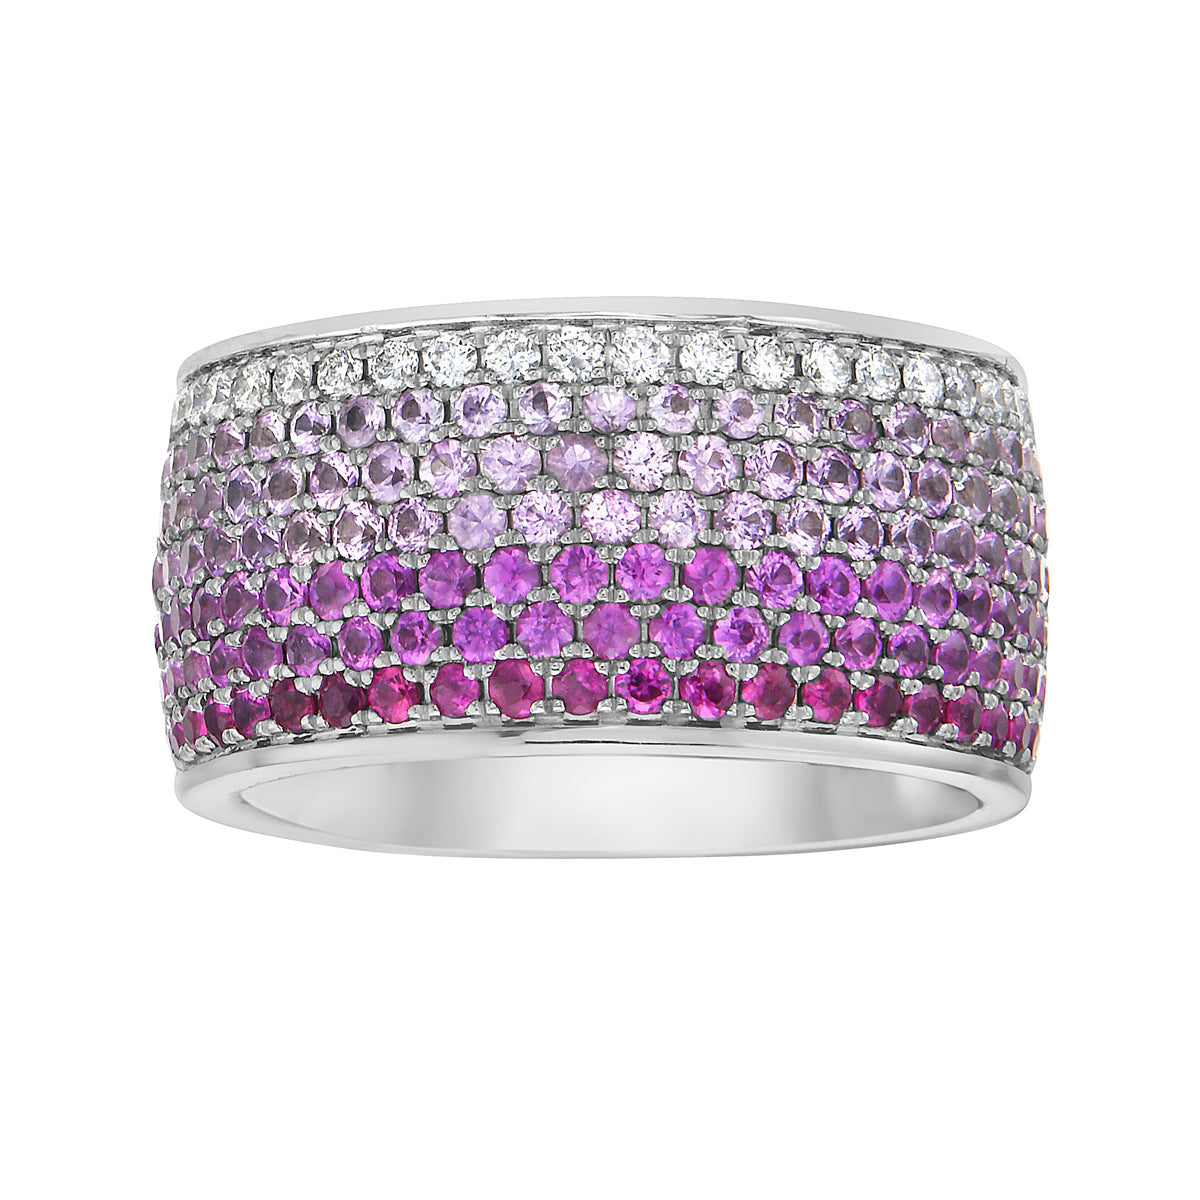 14K White Gold Multi Row Pink Sapphire and Diamond Ring